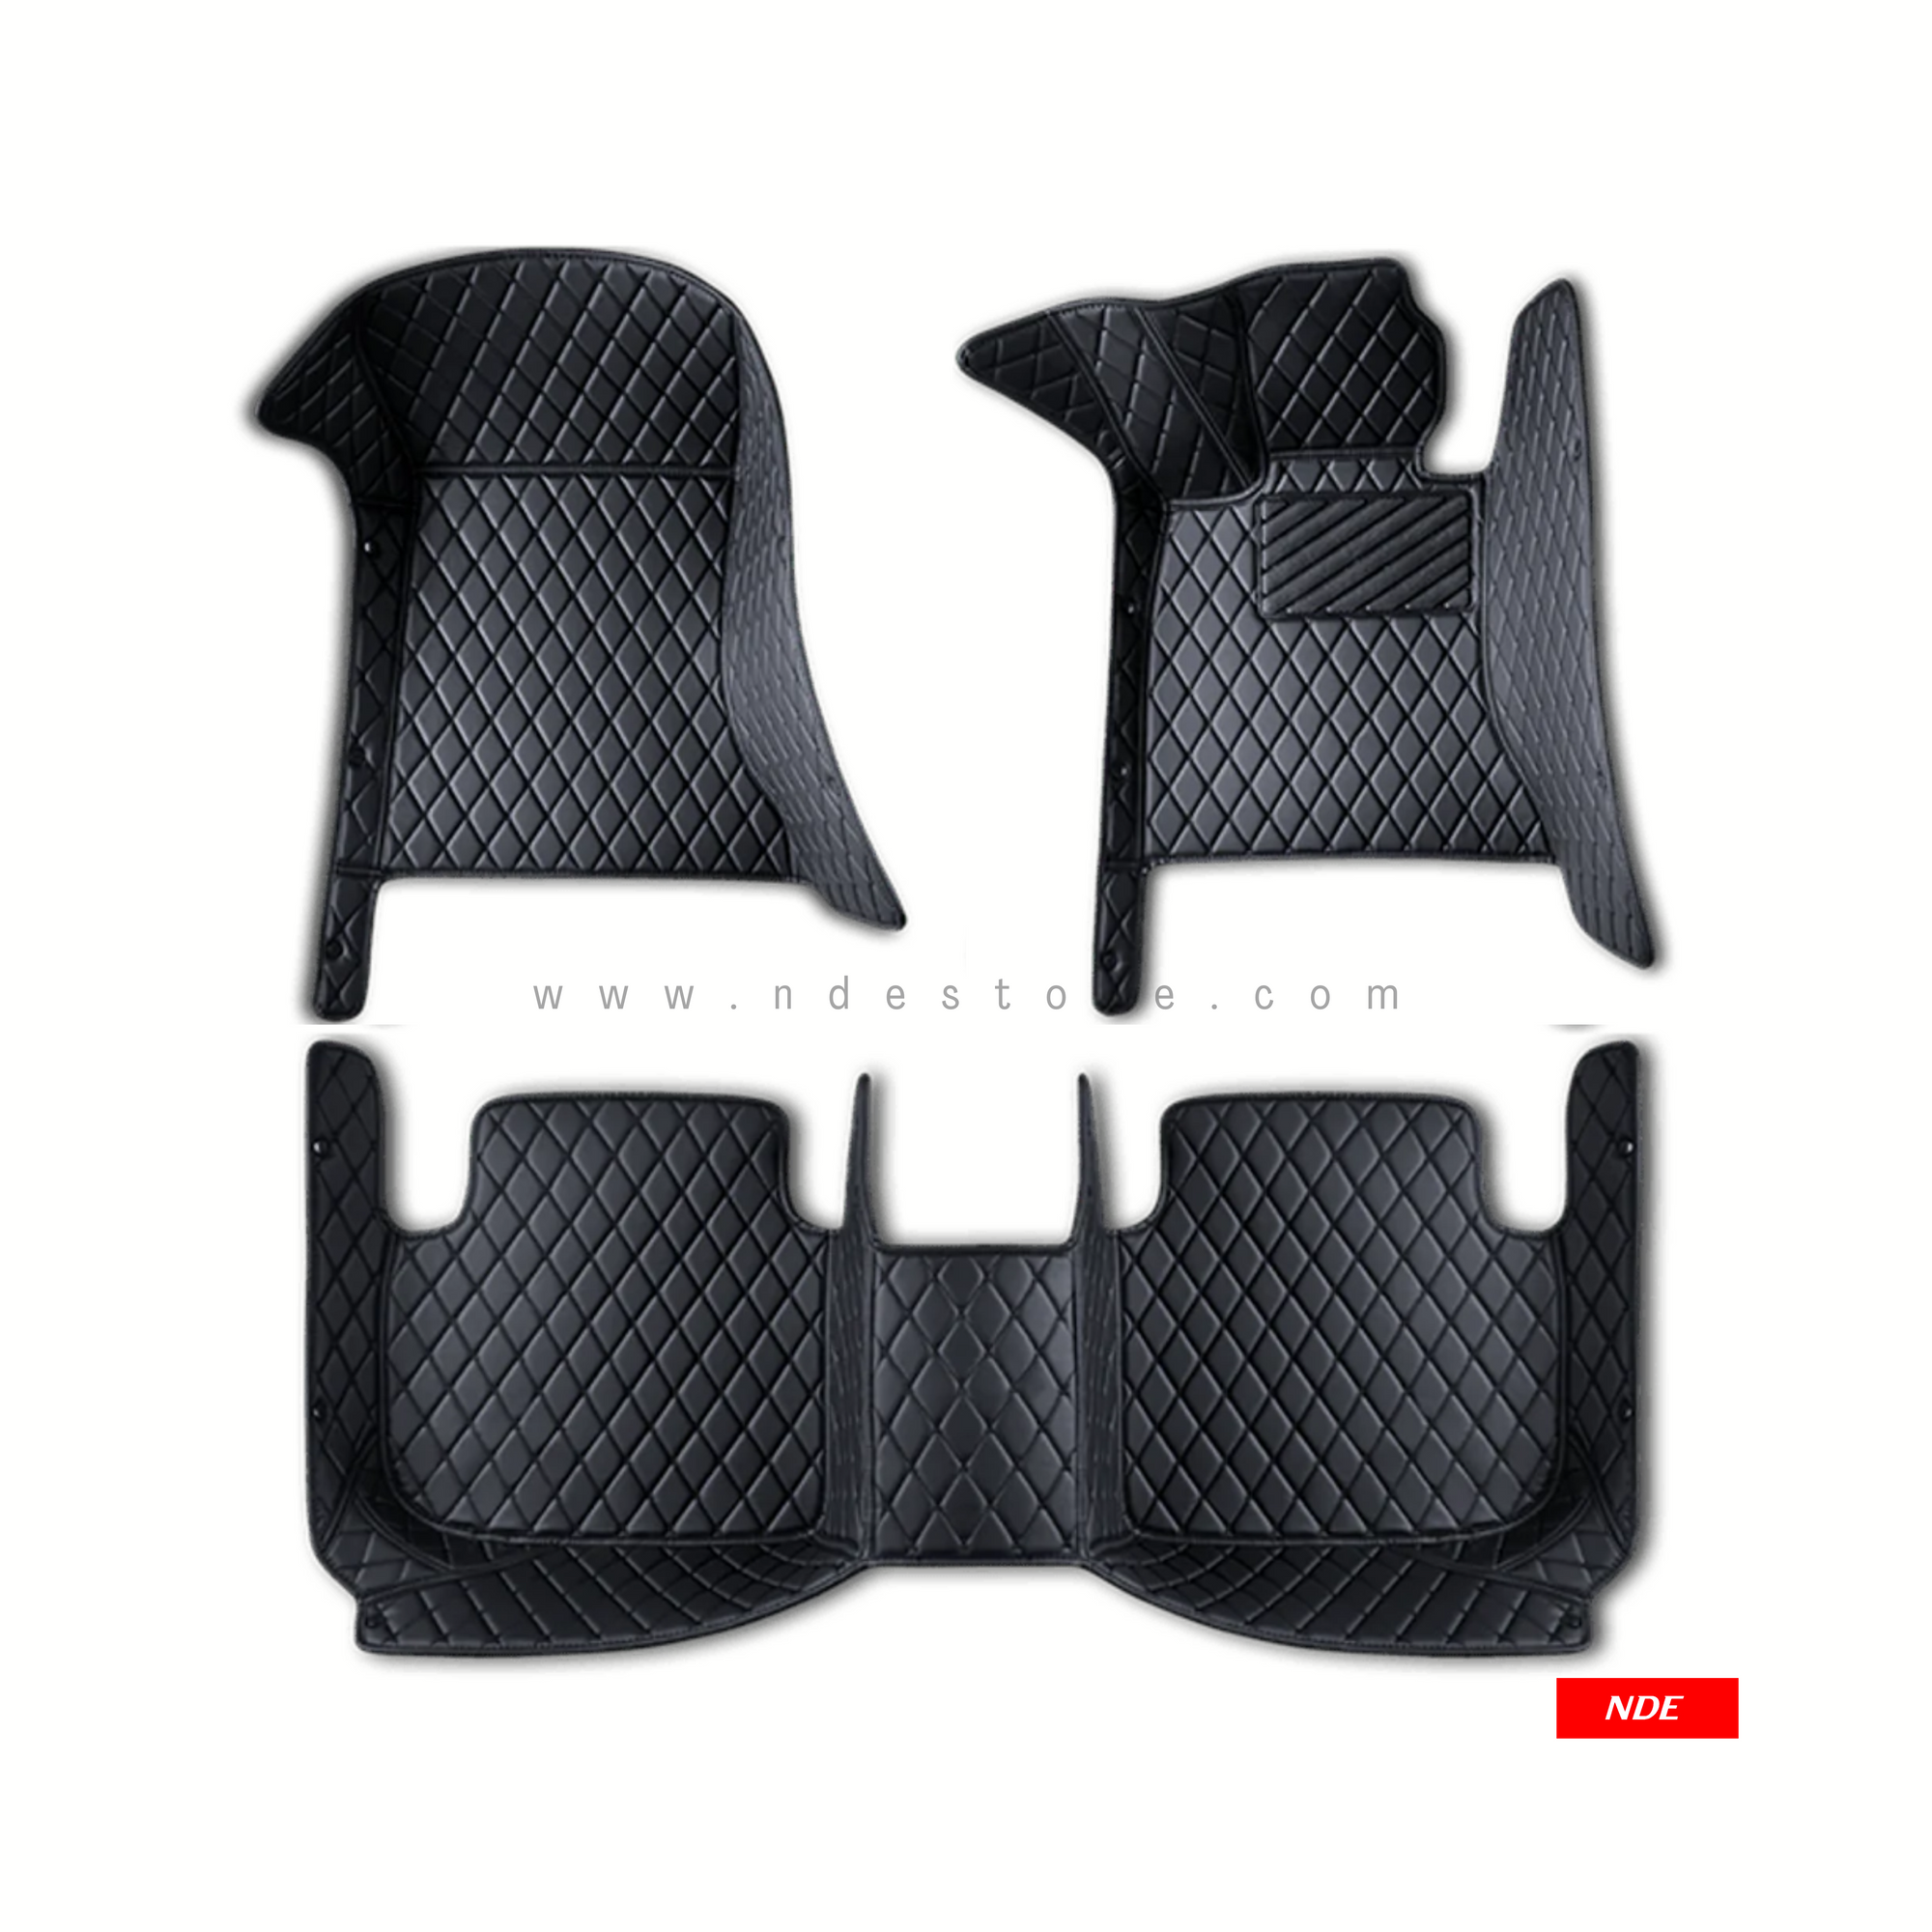 FLOOR MAT 7D STYLE FOR BMW X5